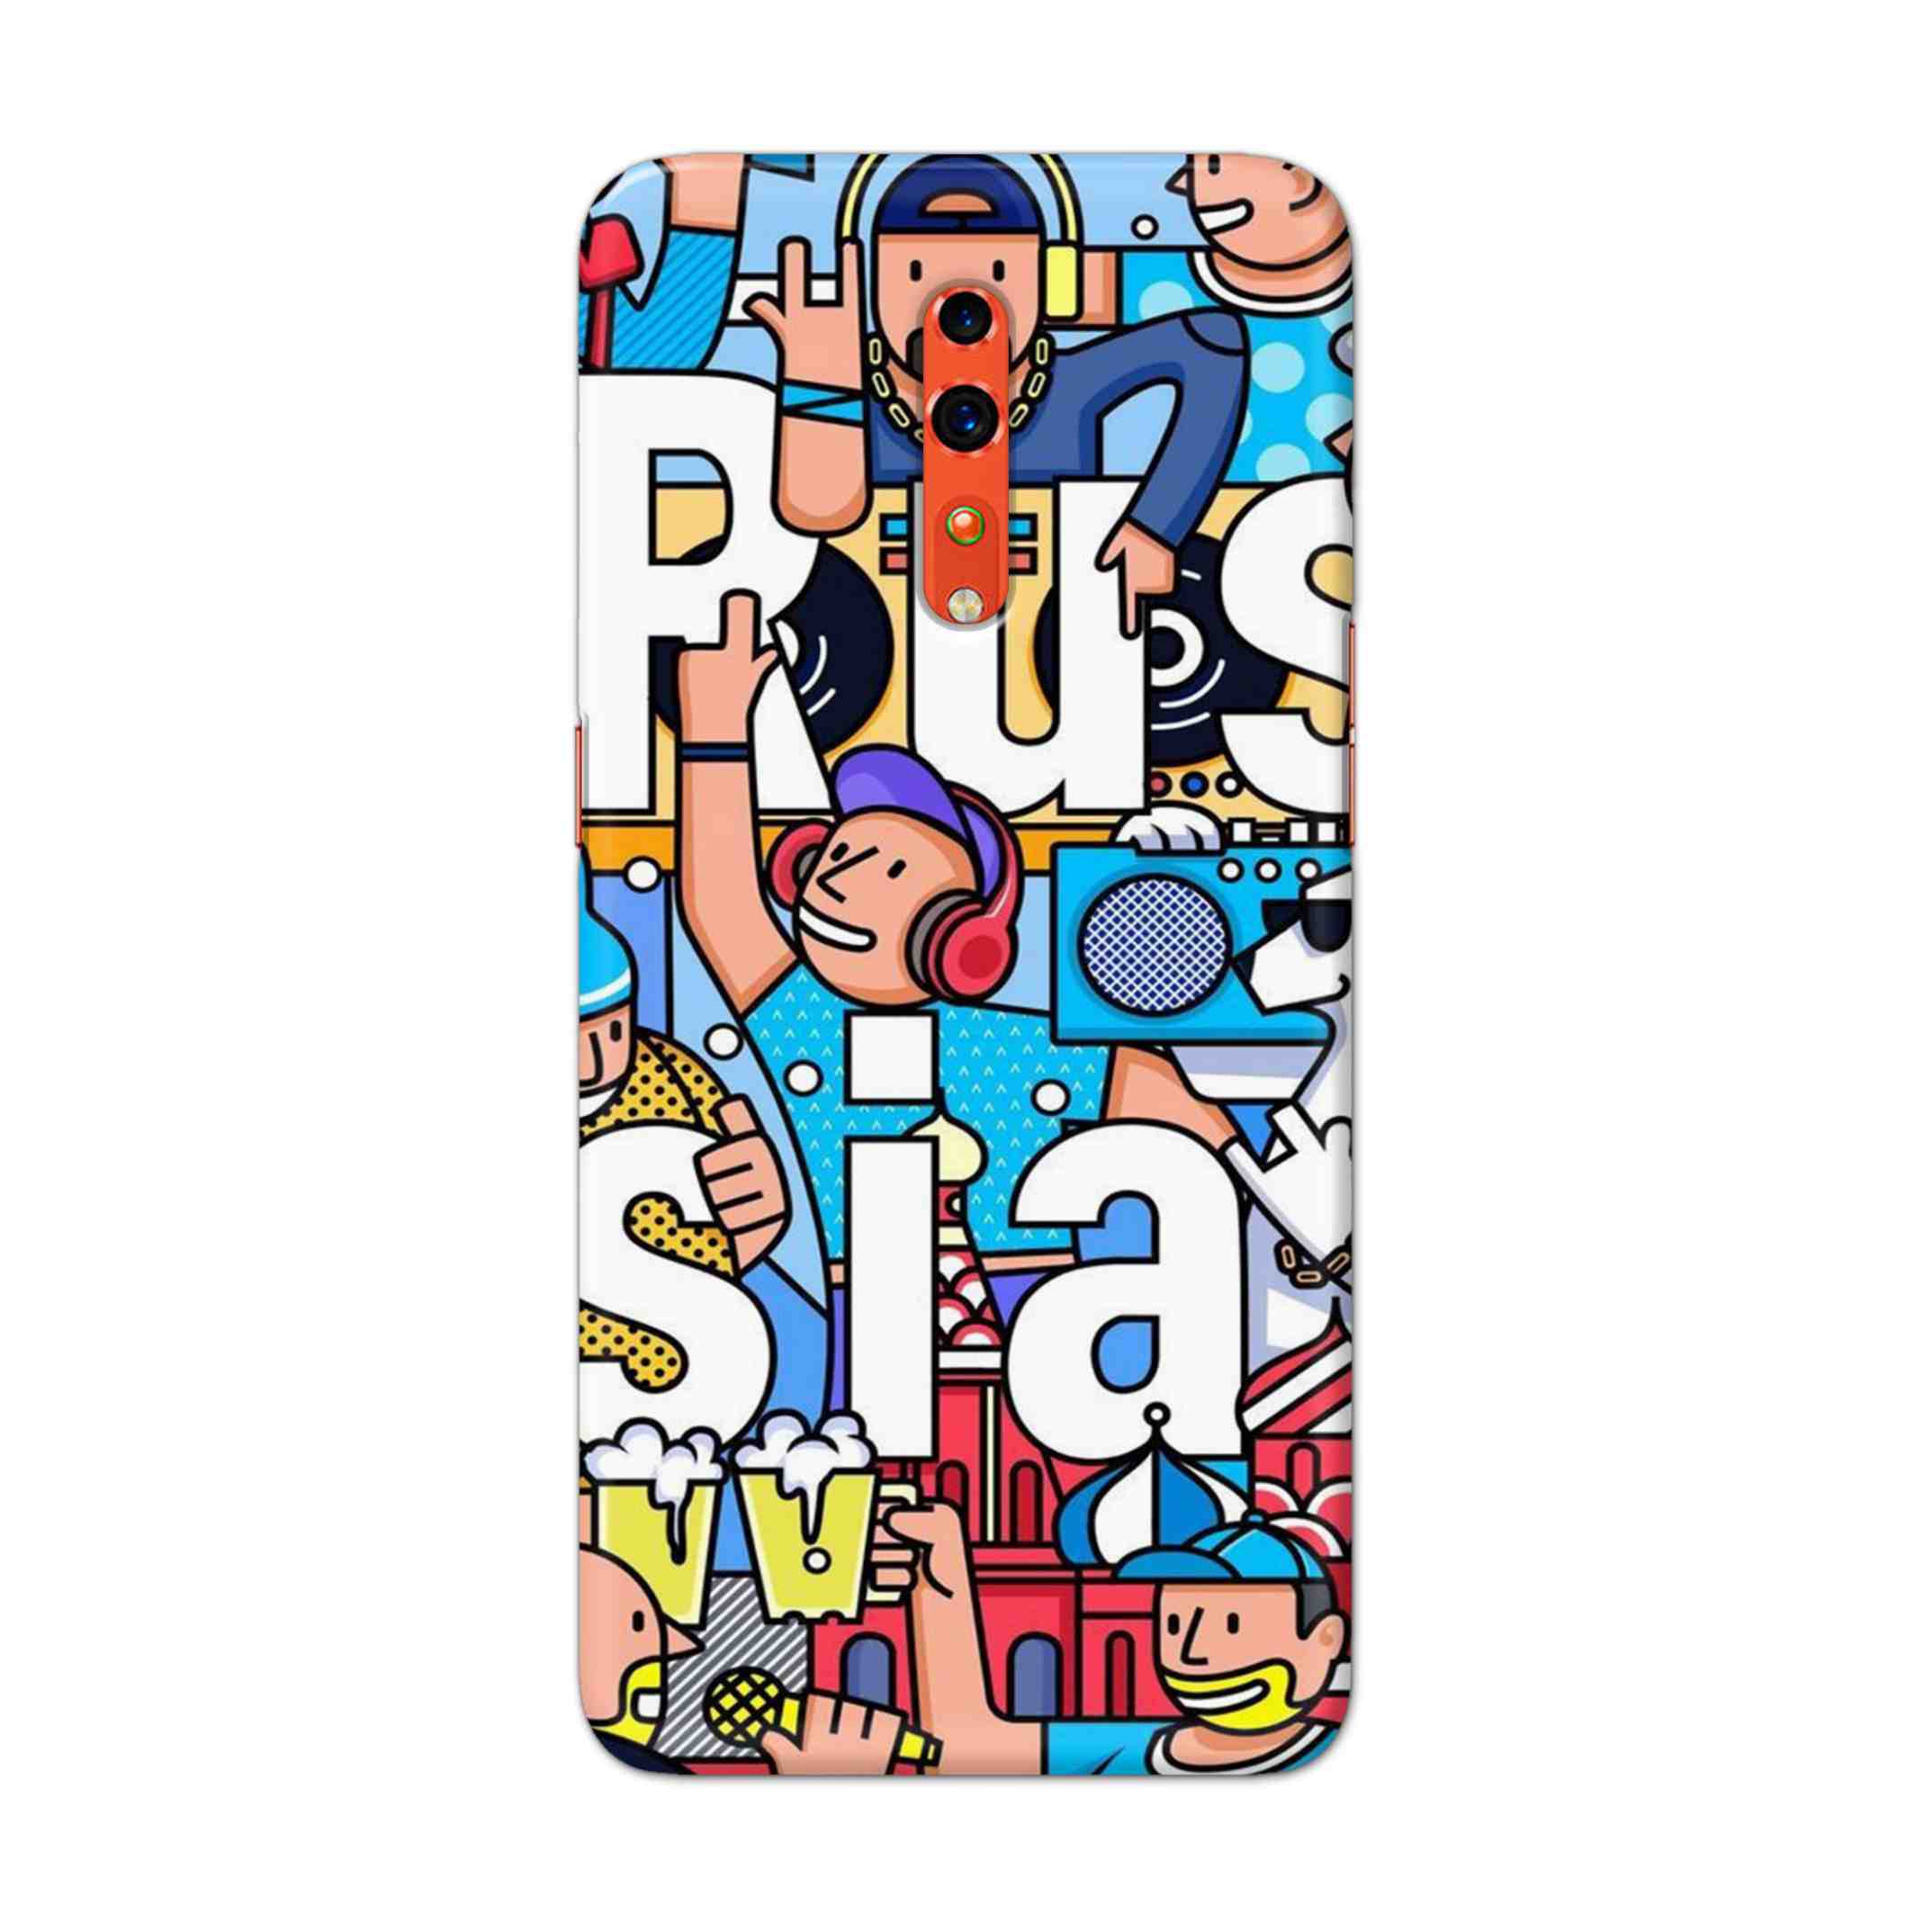 Buy Russia Hard Back Mobile Phone Case Cover For OPPO Reno Z Online